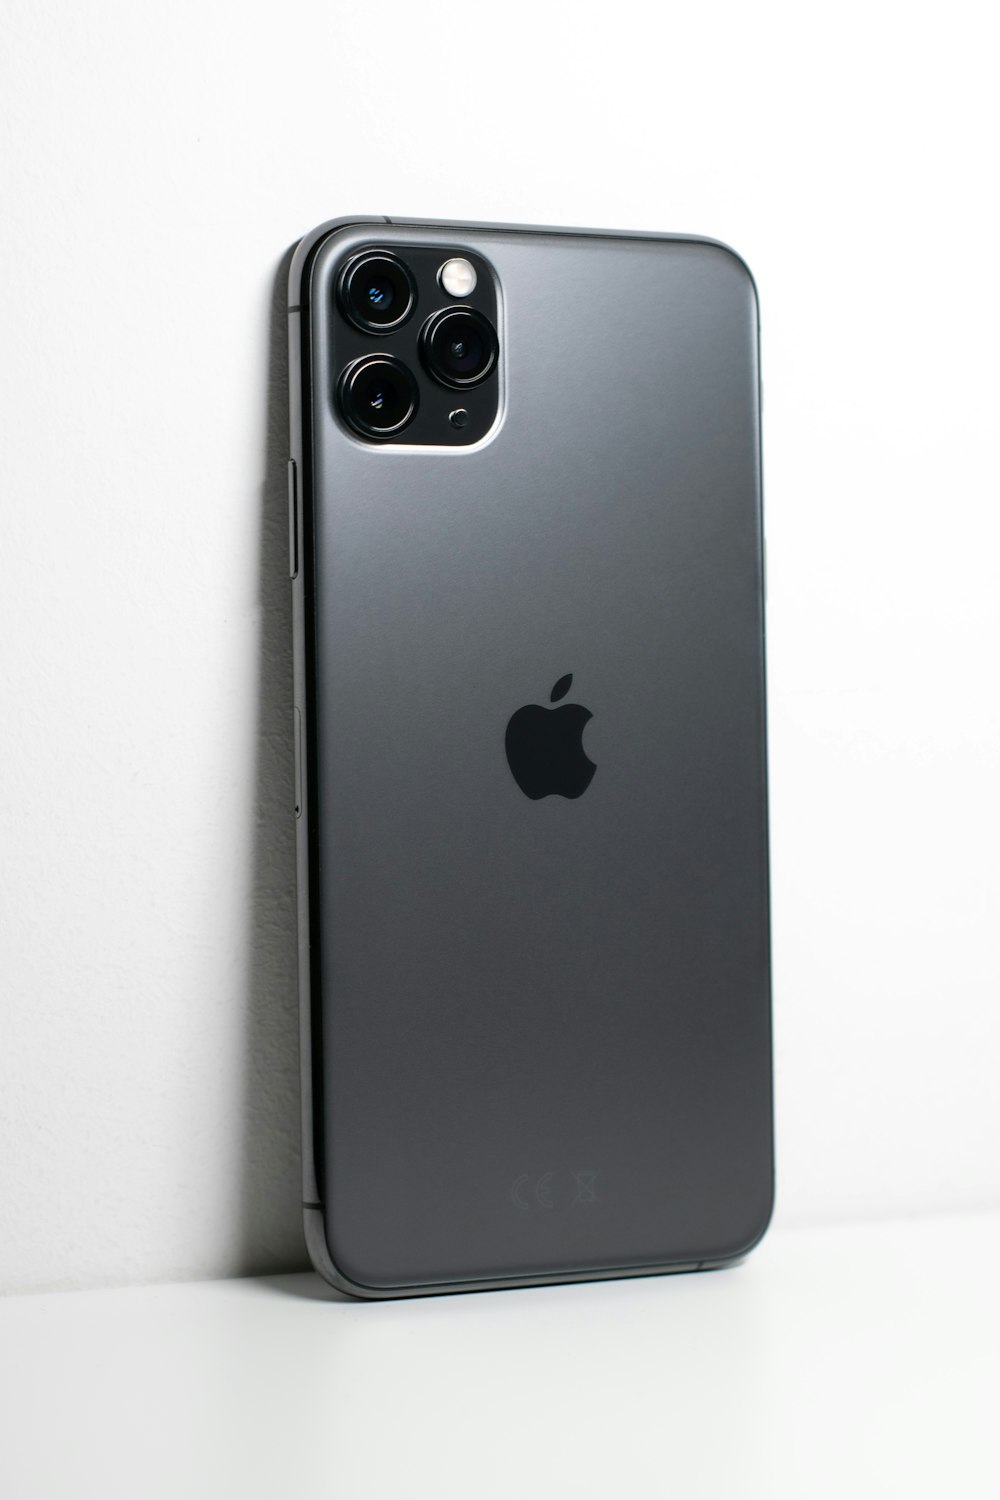 black iphone 7 plus on white surface